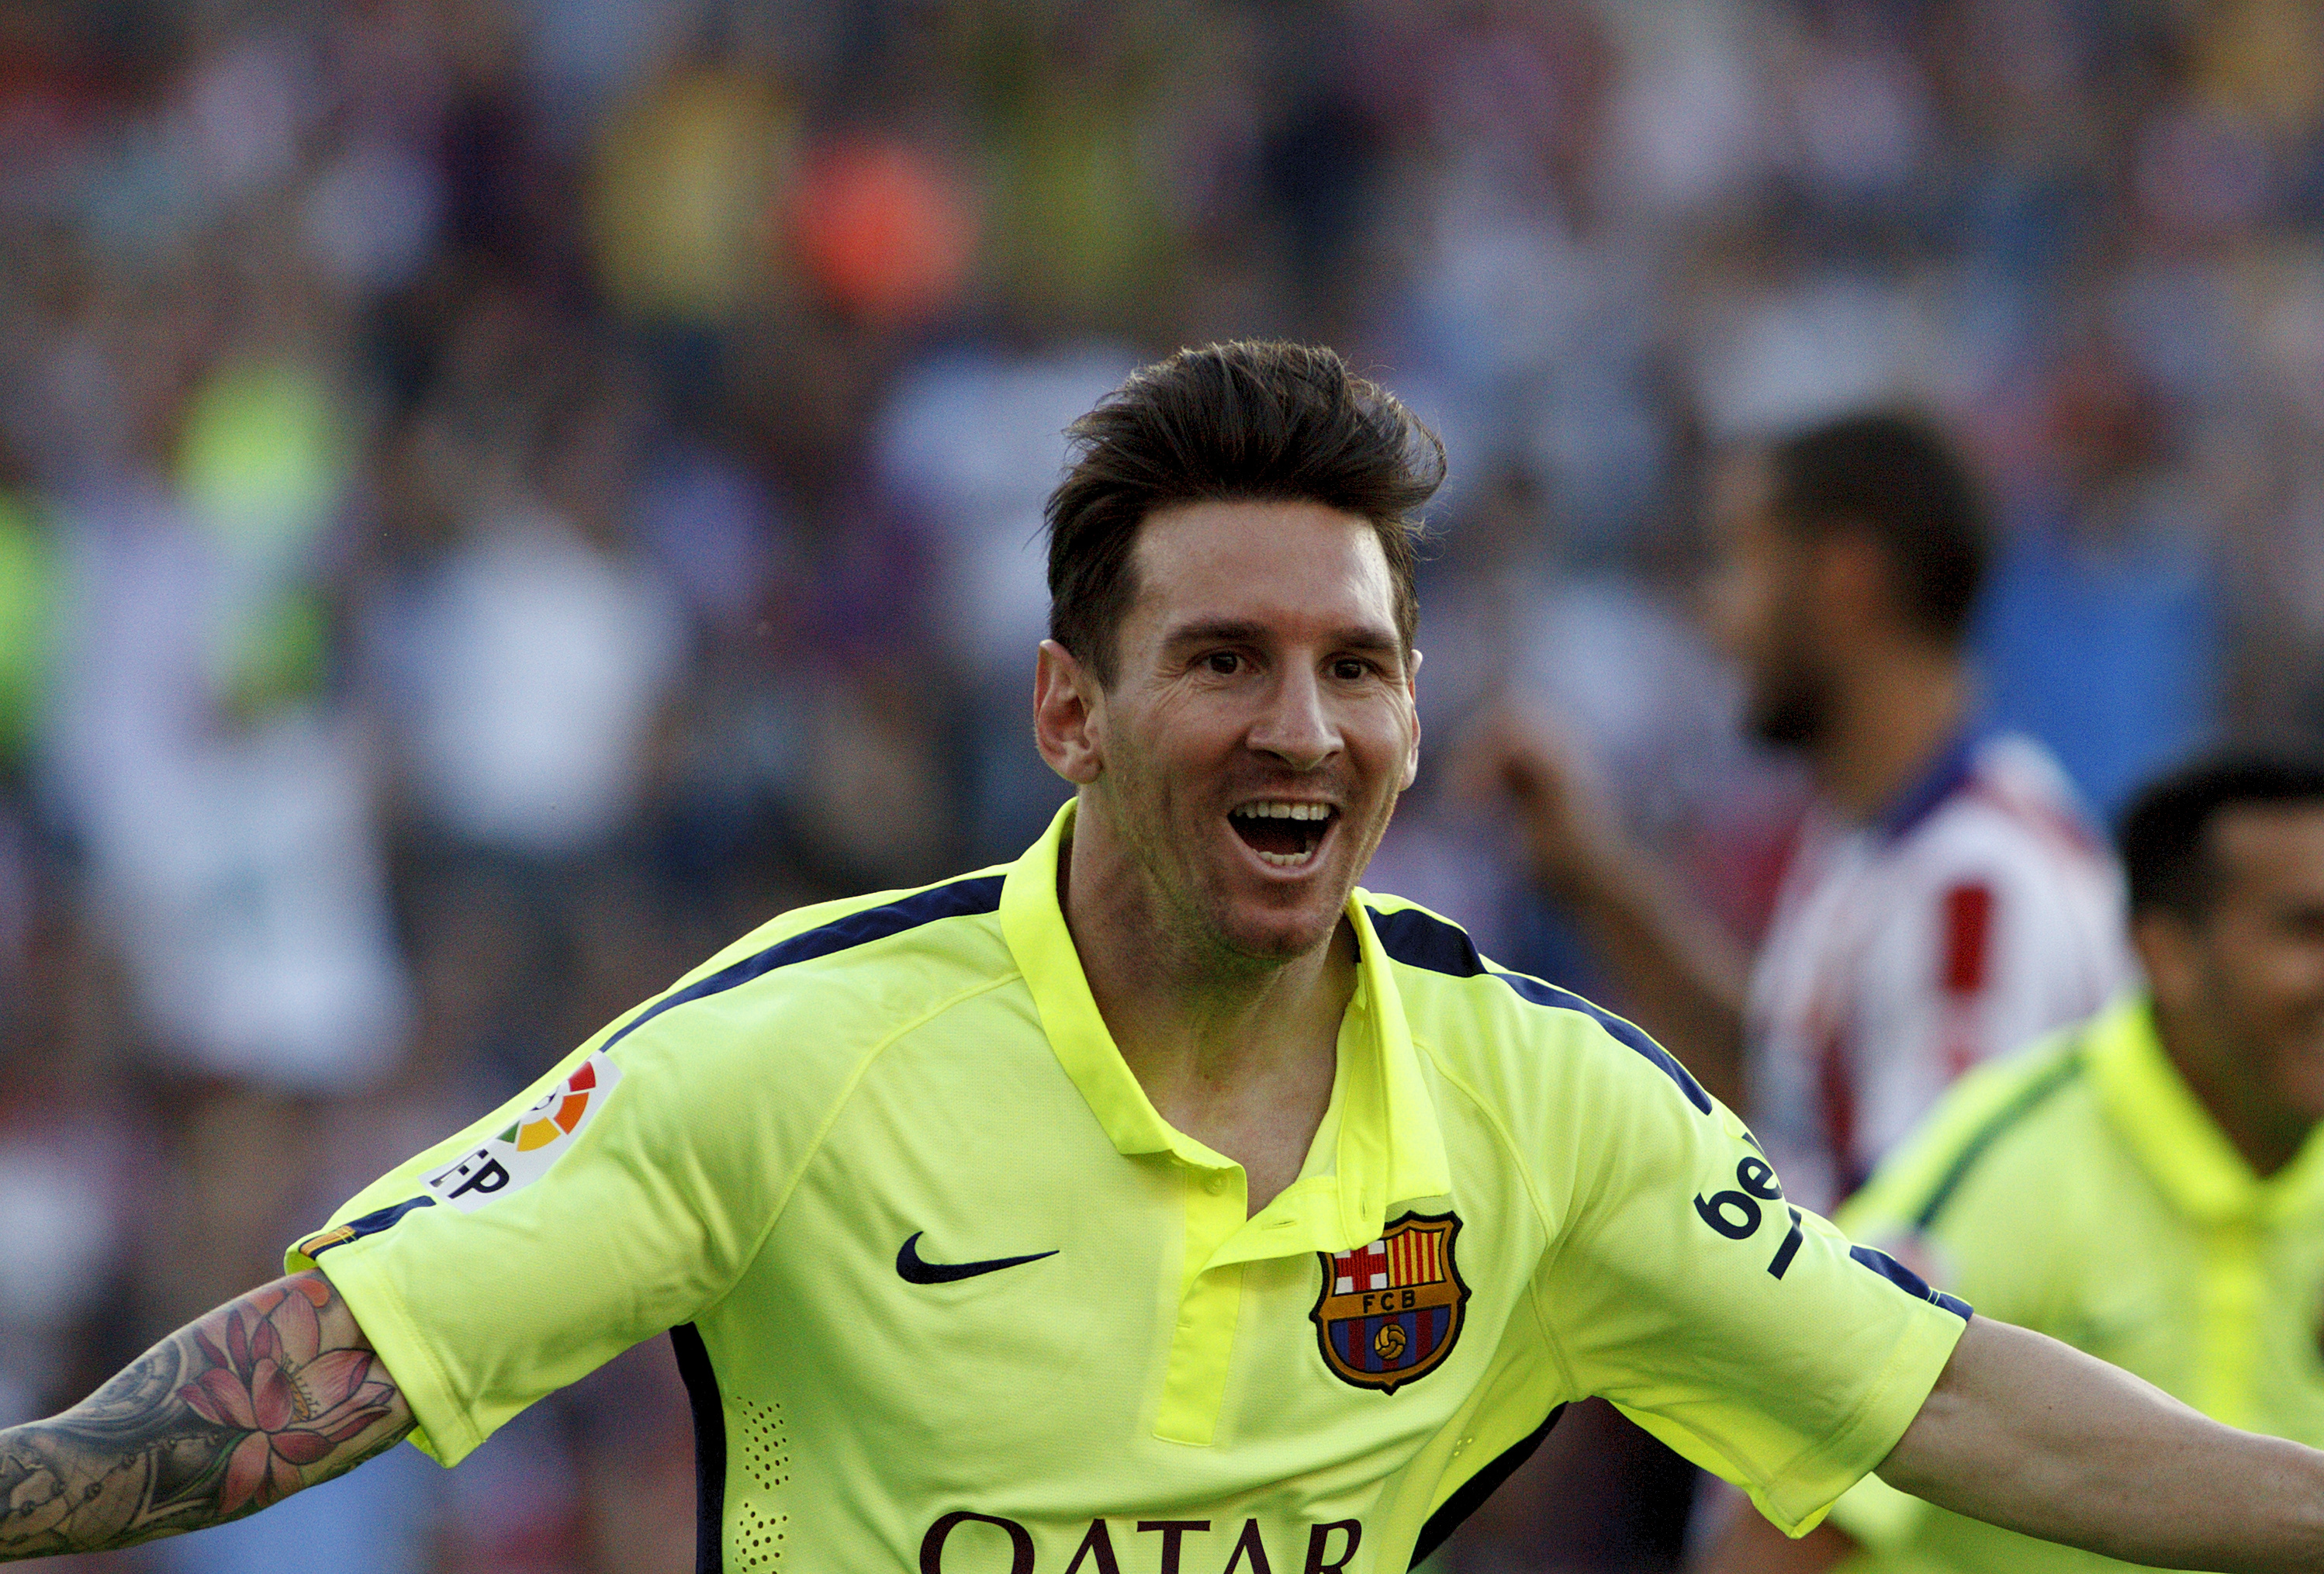 Lionel Messi celebrates after scoring for Barcelona against Atletico Madrid in May 2015.